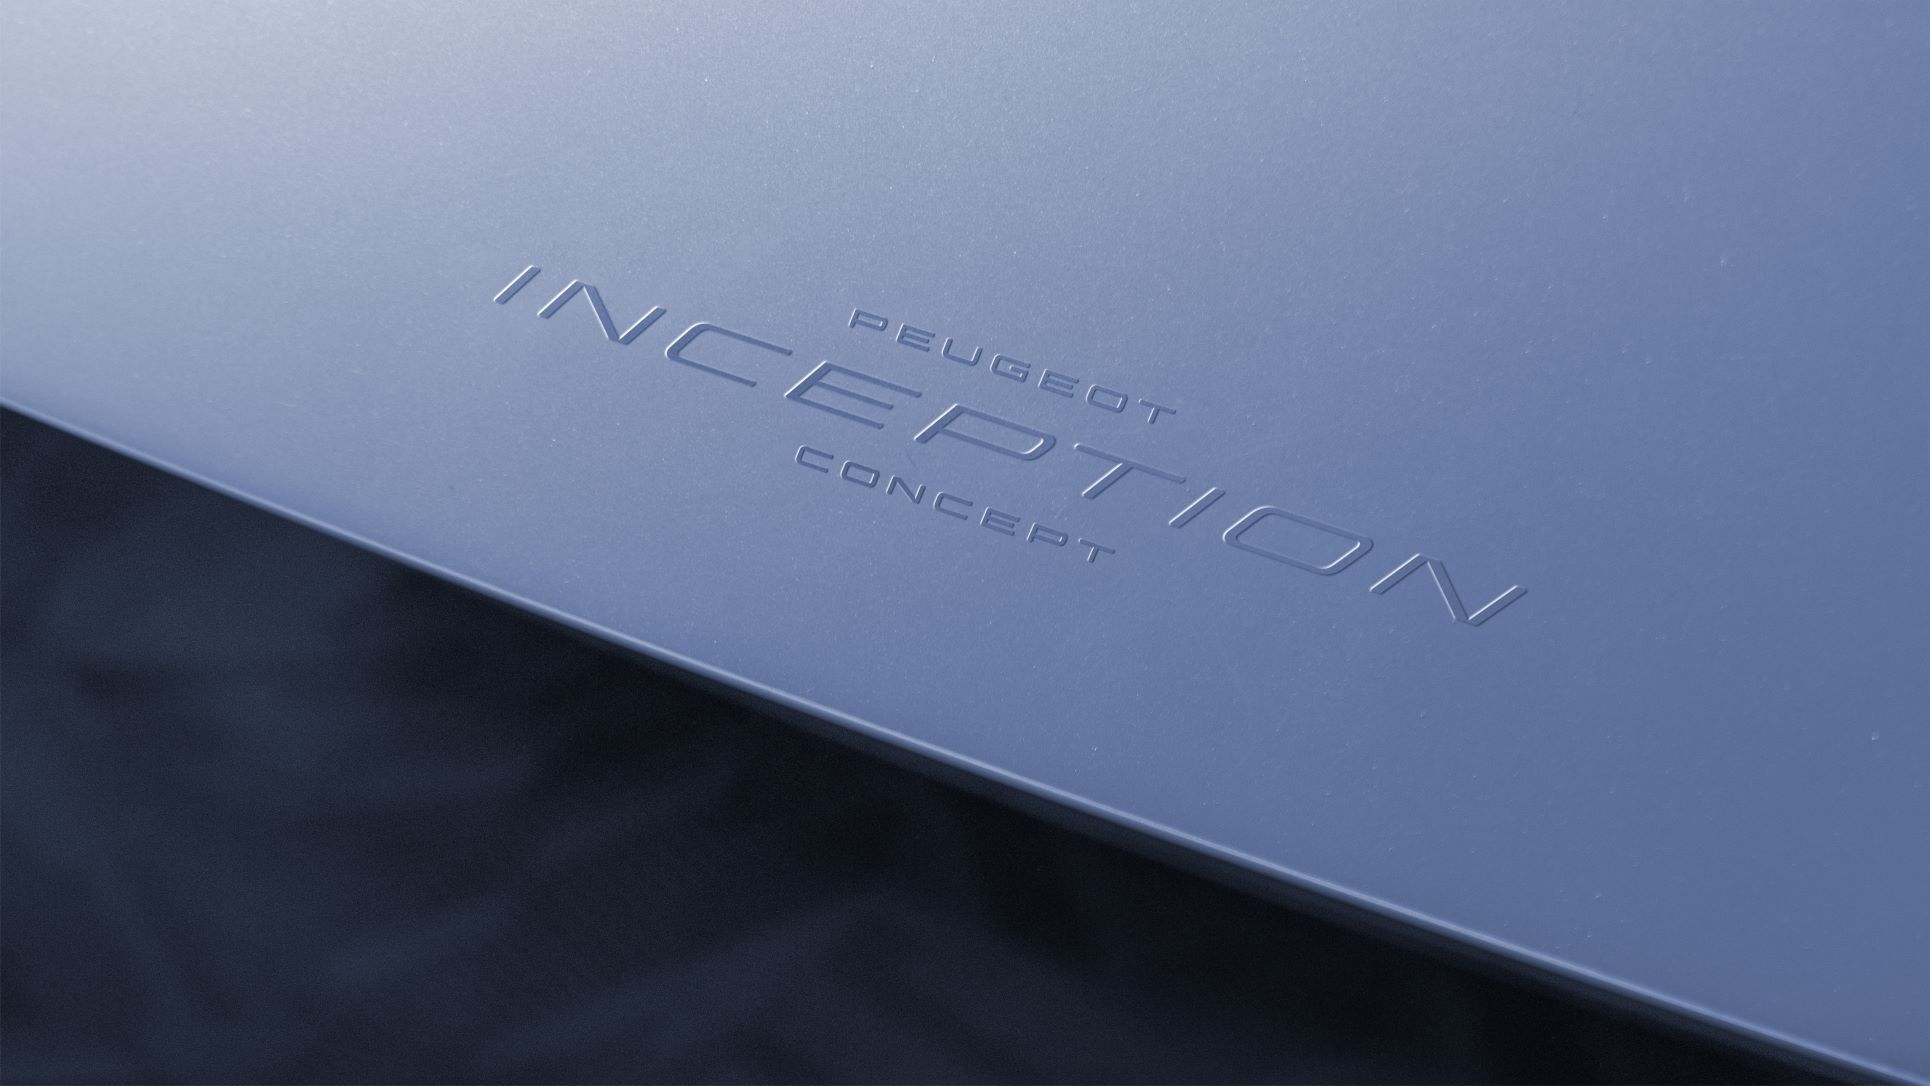 A close-up photo of the Peugeot Inception Concept logo